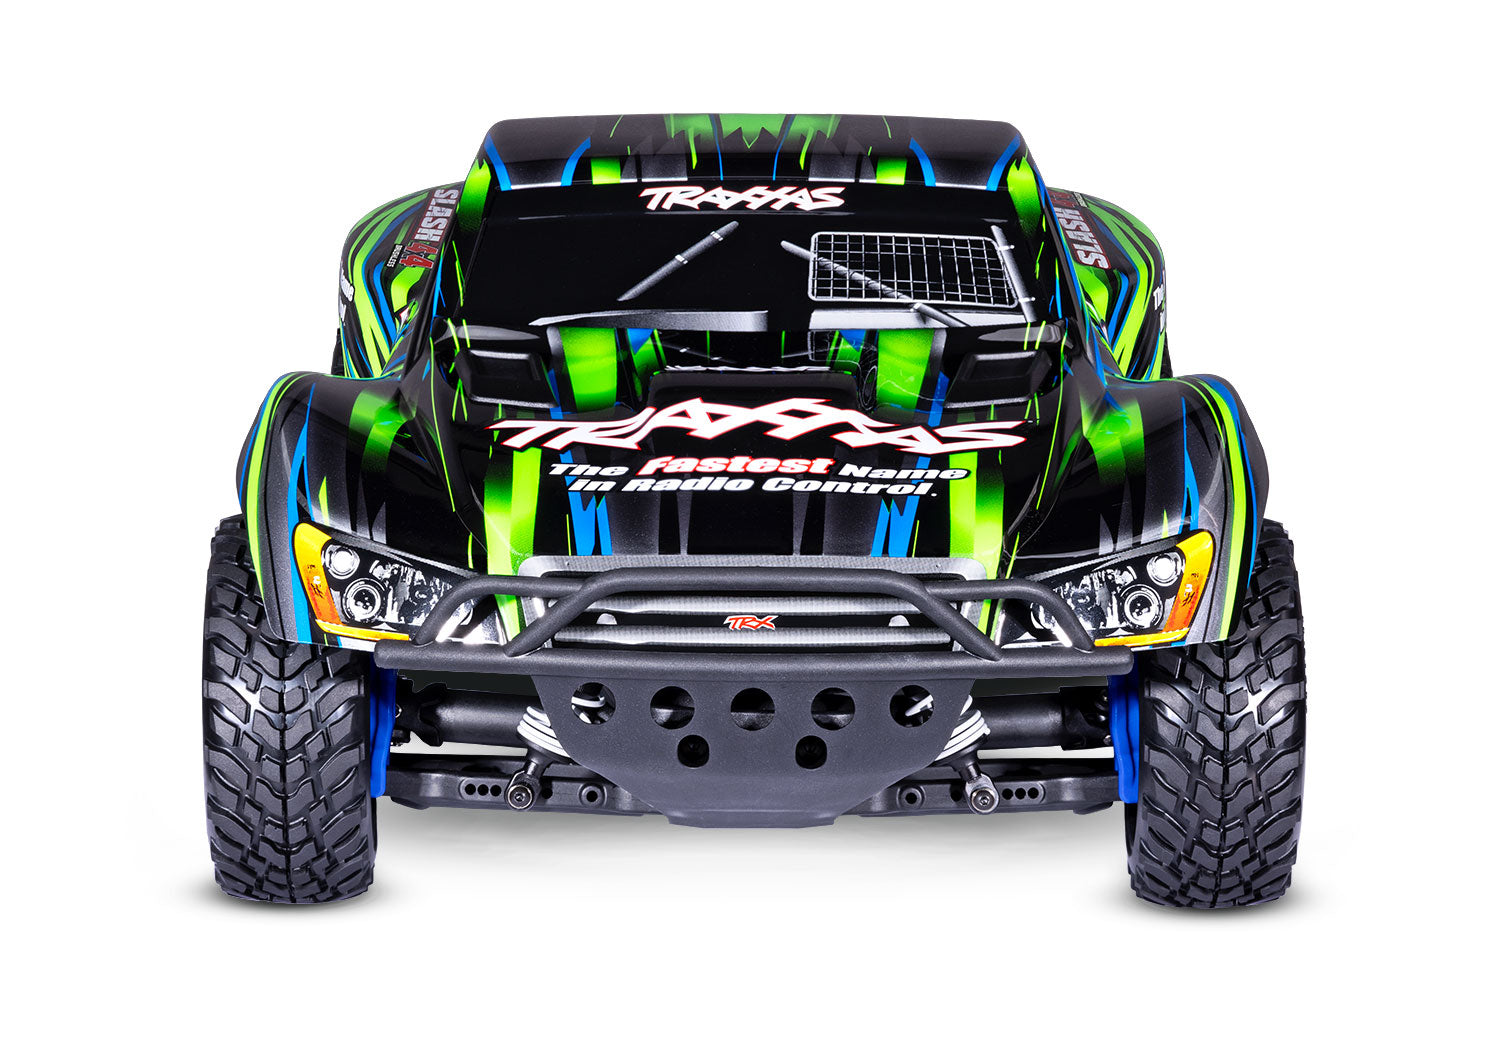 68154-4-GREEN SLASH 4X4 BL-2S Brushless: 1/10 Scale 4WD Short Course Truck